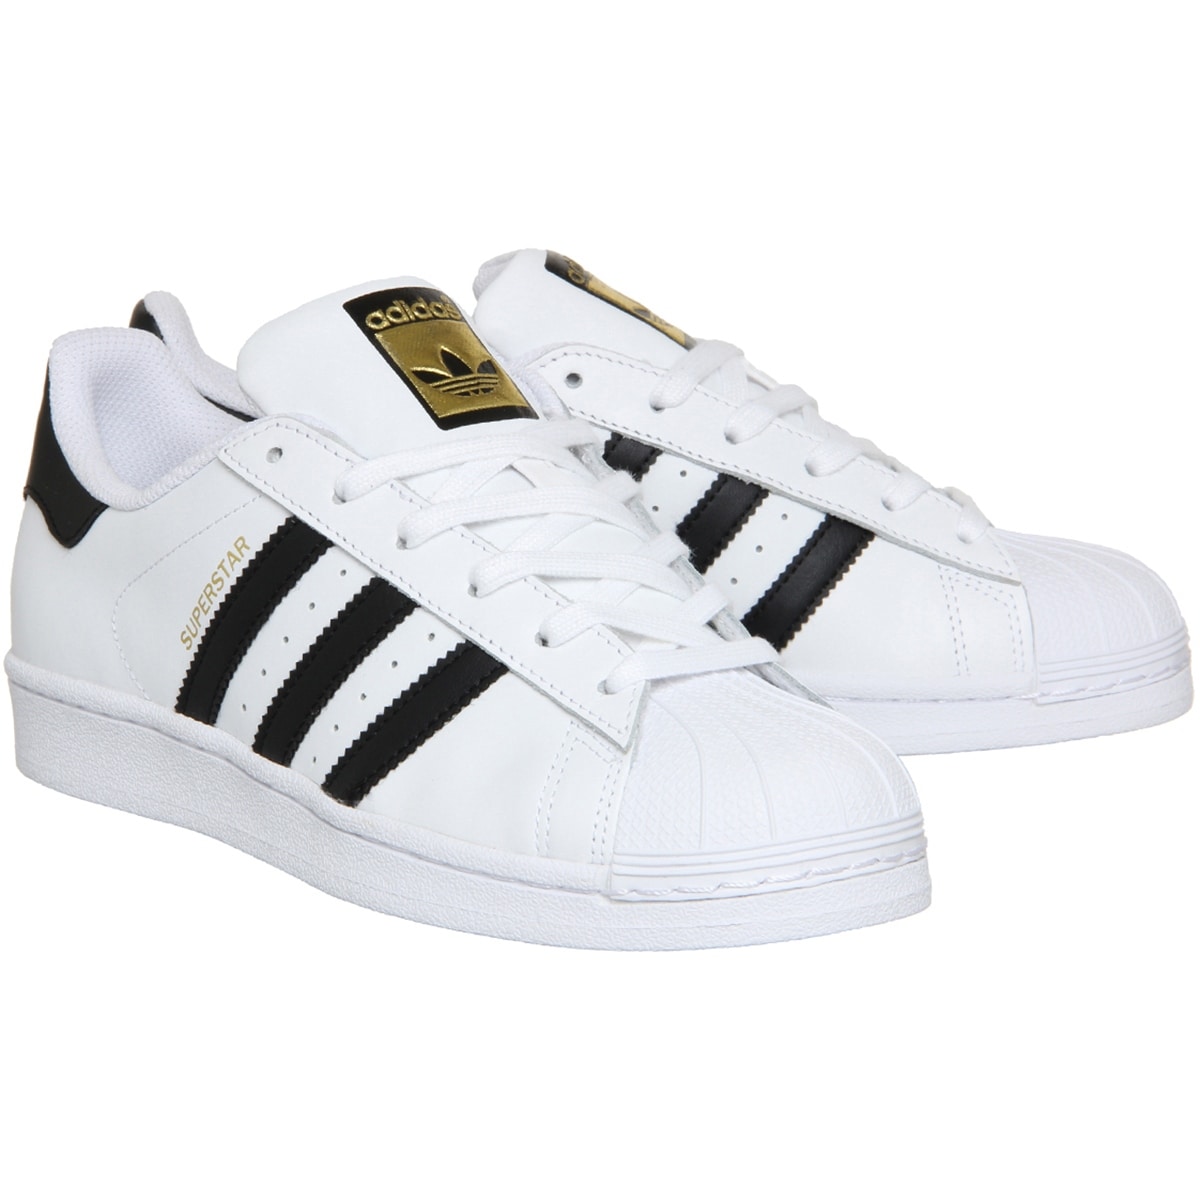 adidas shoes with rubber toe